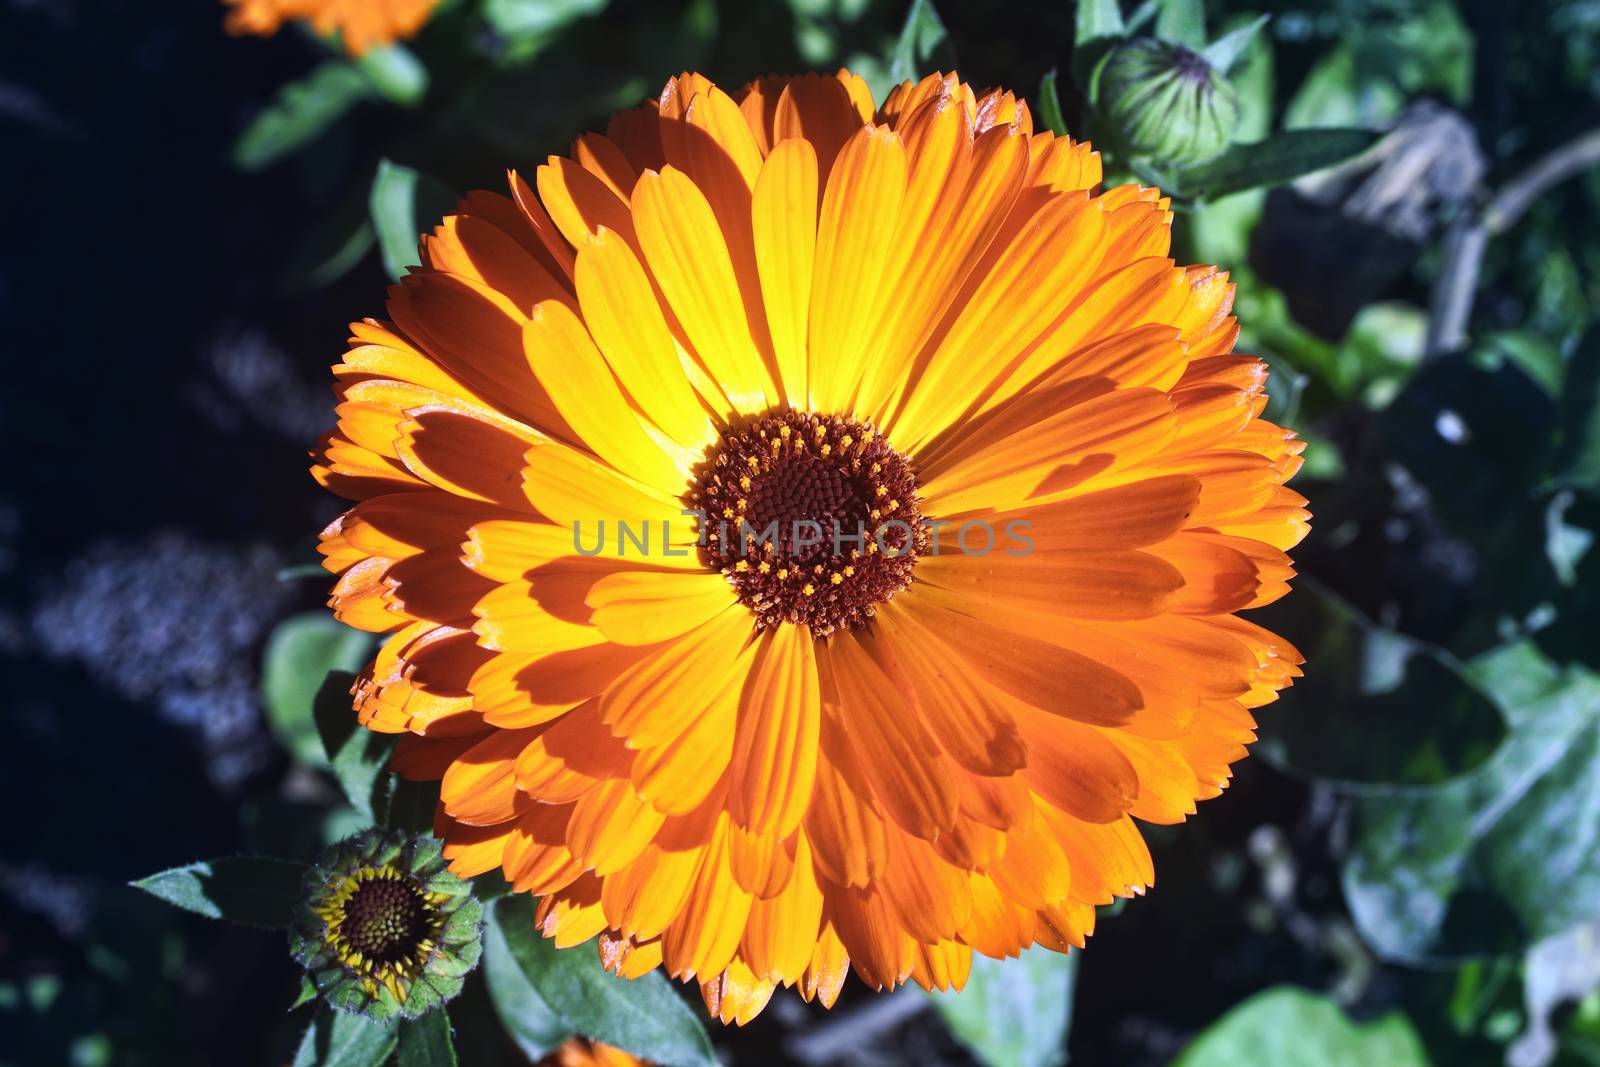 Marigold (Calendula officinalis) a common cultivated annual bedd by ant